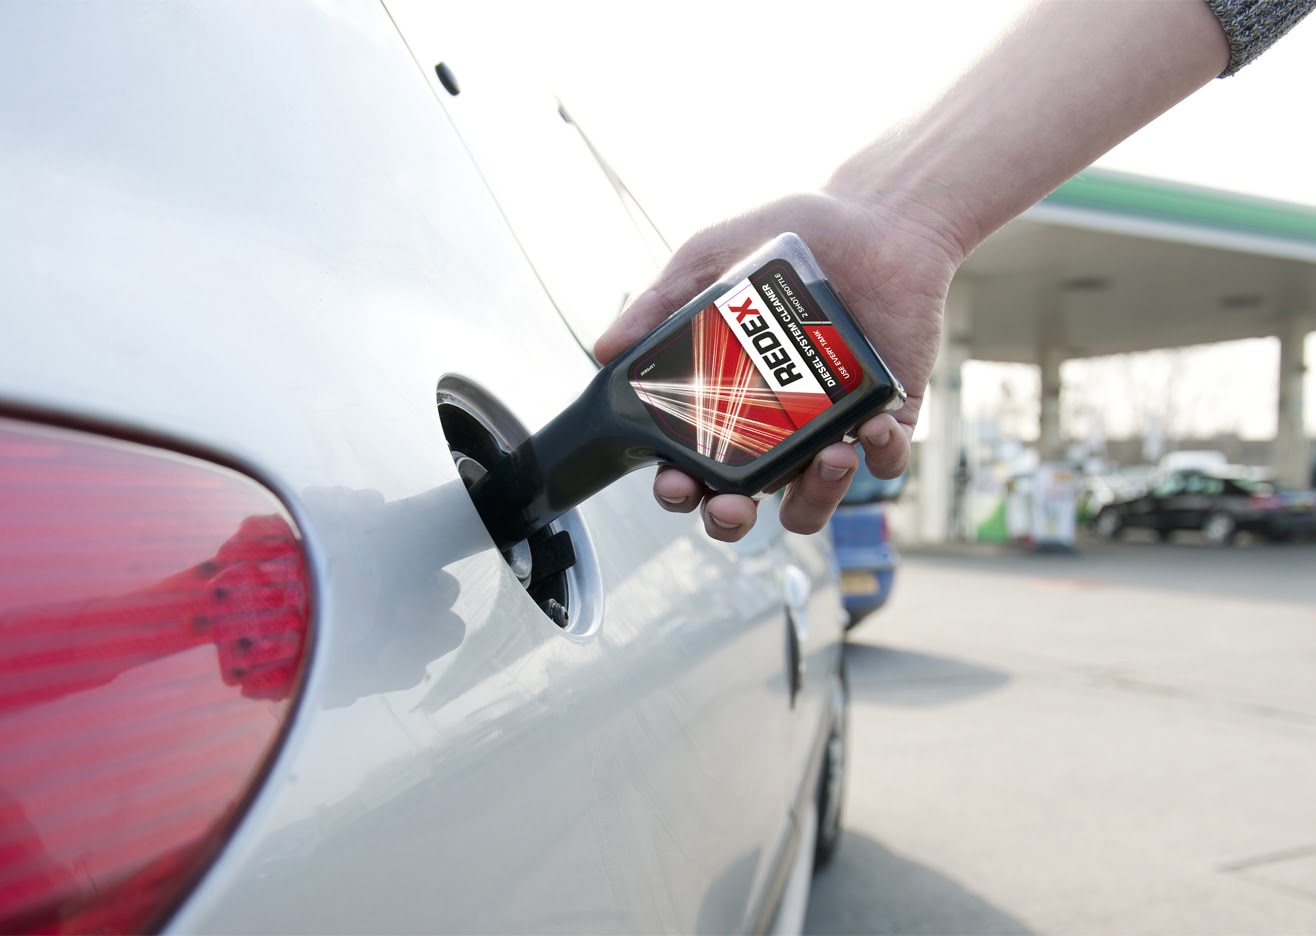 Redex Faqs Your Questions About Fuel Additives Answered